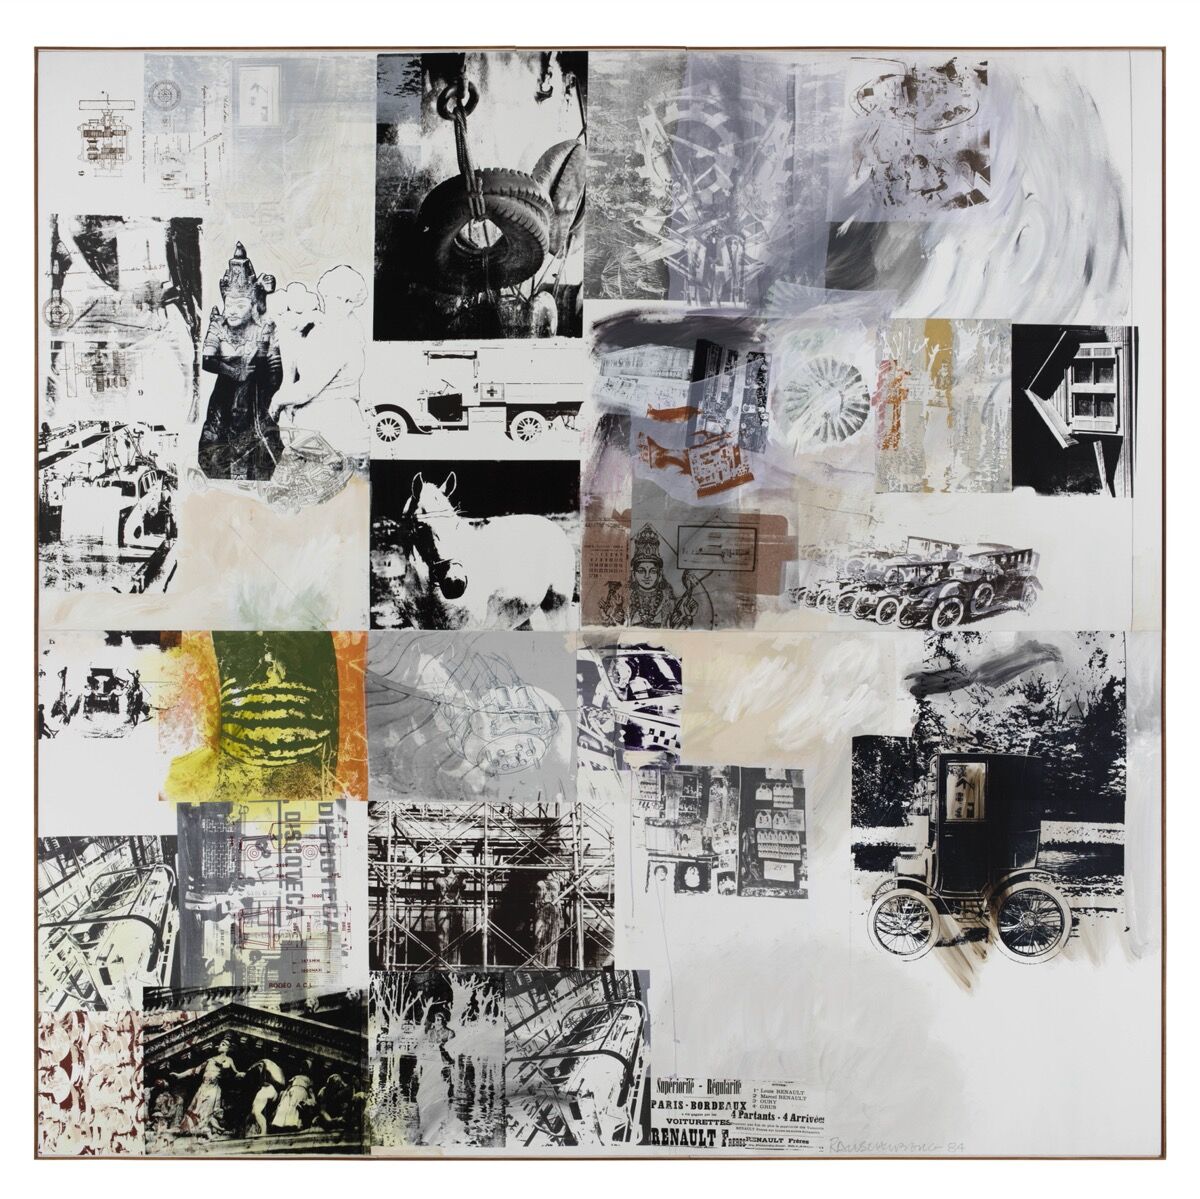 Robert Rauschenberg, Rollings (Salvage), 1984. Courtesy of Thaddaeus Ropac.